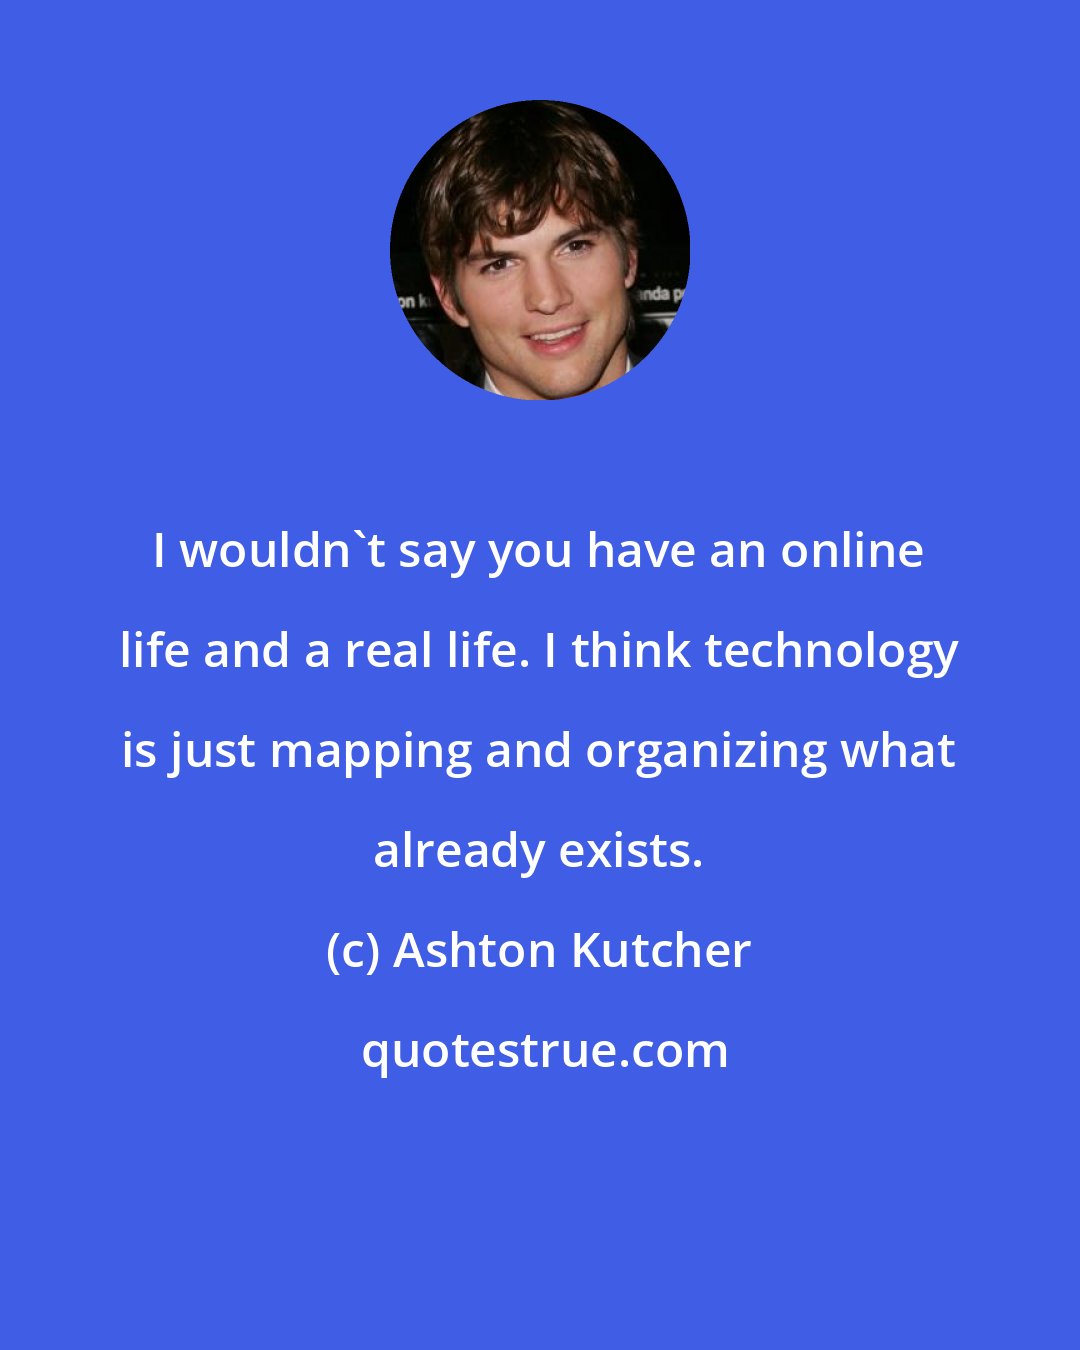 Ashton Kutcher: I wouldn't say you have an online life and a real life. I think technology is just mapping and organizing what already exists.